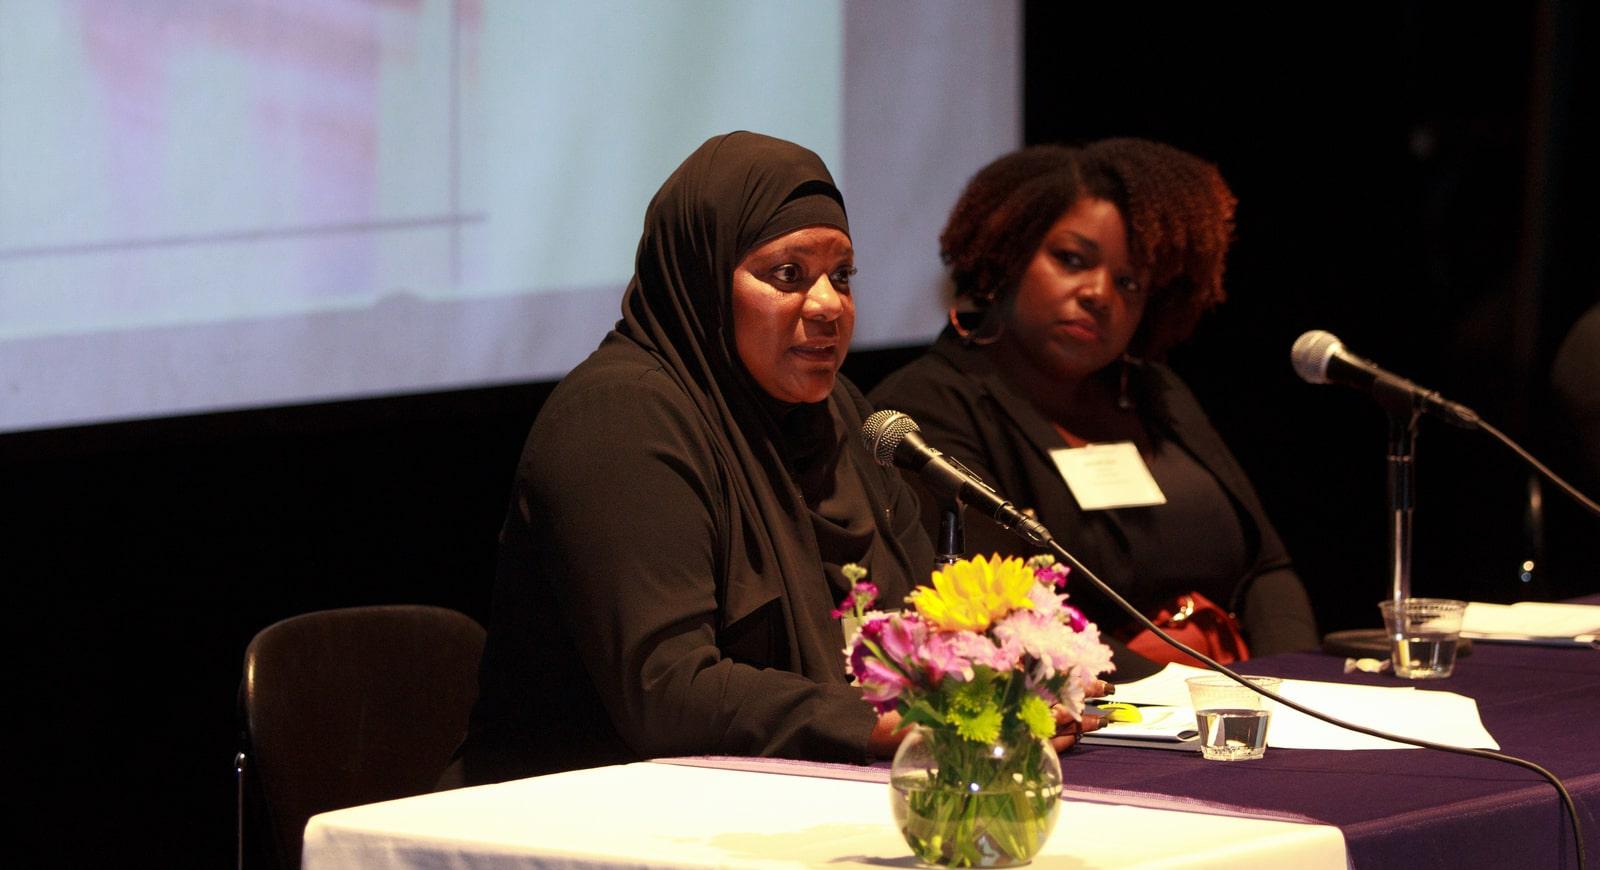 Photo of two Black women on a panel. The hijabi woman is speaking, while the woman beside her listens.